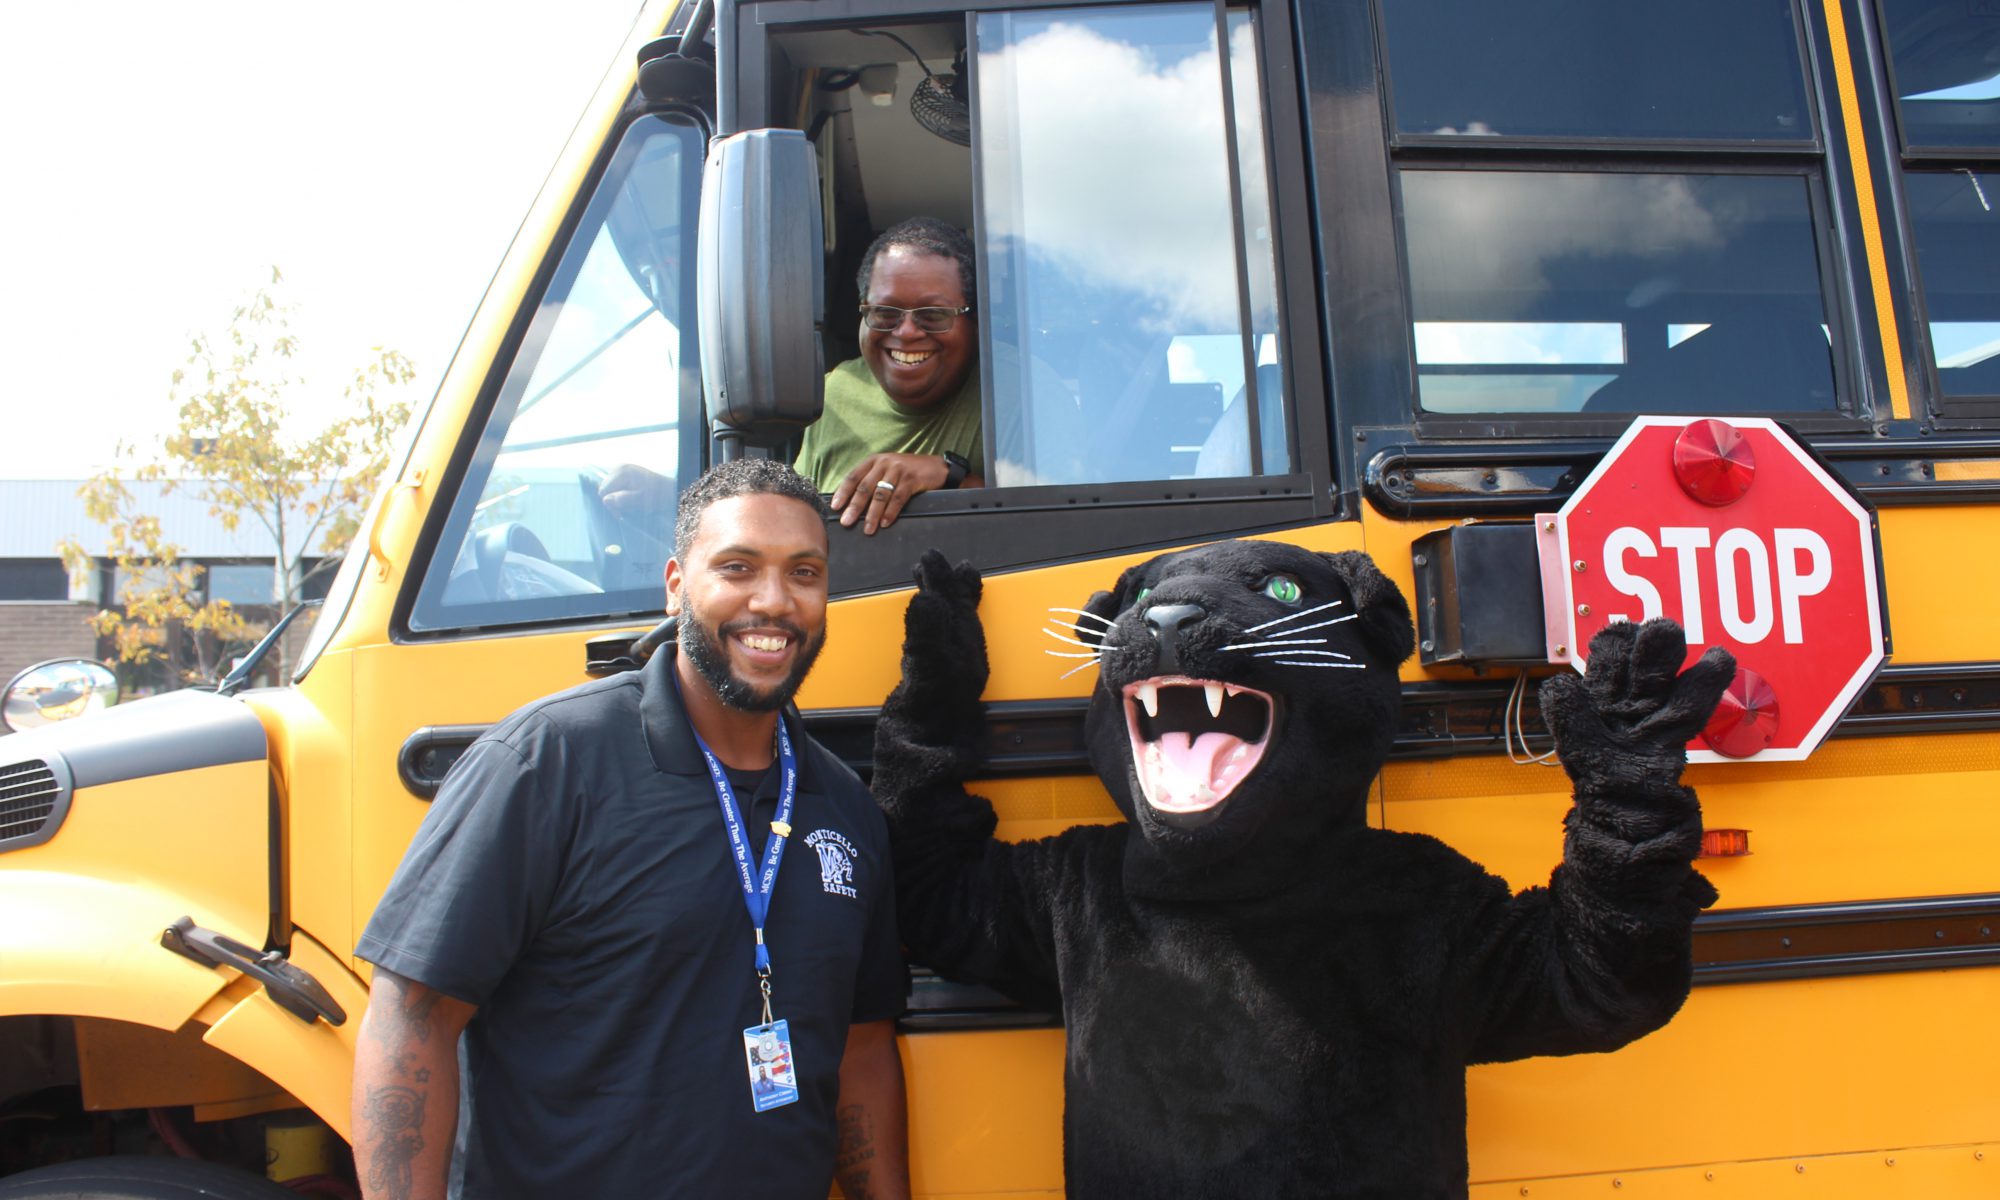 A bus driver in a school bus smiling with panther mascot and another Monticello employee.